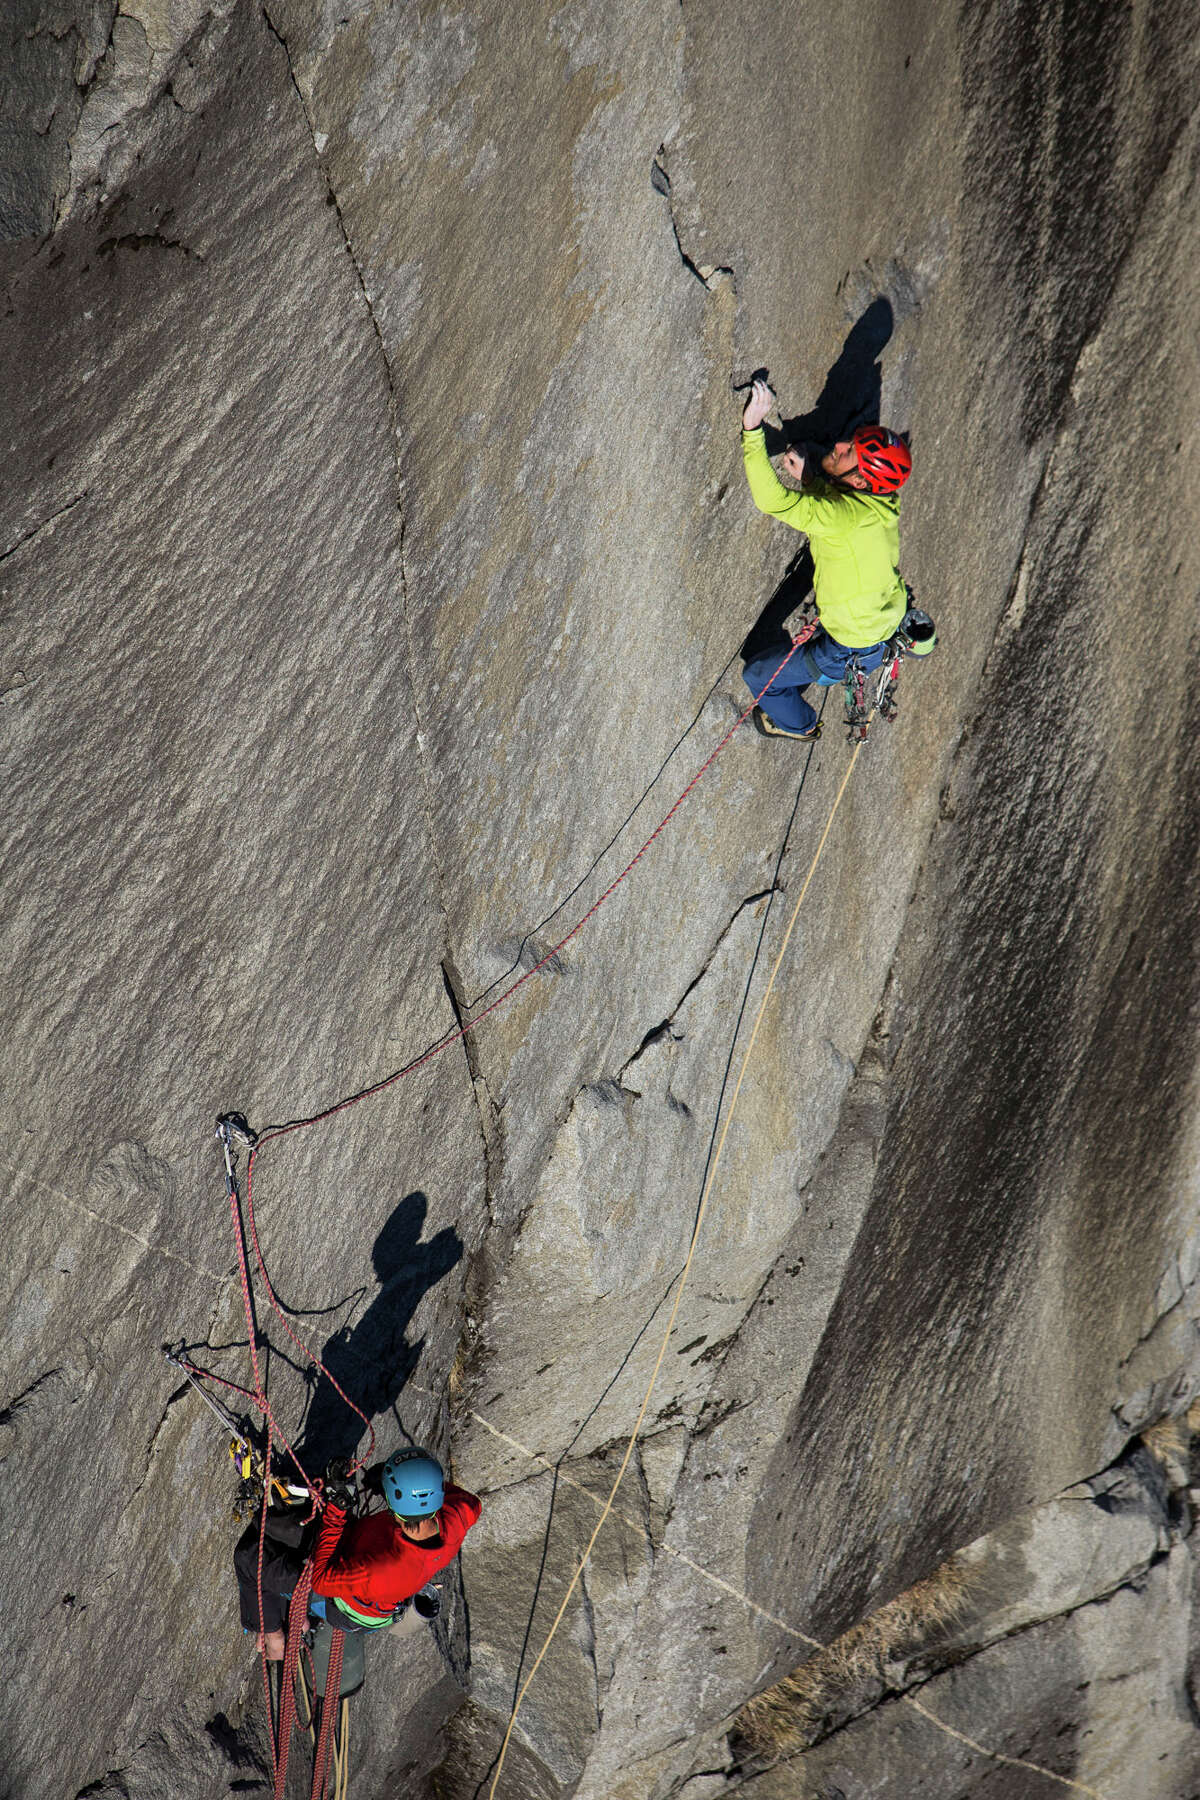 Tommy Caldwell (top) ascends the final pitch of the Dawn Wall on El Capitan, belayed by his climbing partner, Kevin Jorgeson, in Yosemite National Park in January. Using ropes as a safety measure only, Caldwell and Jorgeson became the first to climb by hand the 3,000-foot granite wall, an ascent they began Dec. 27.